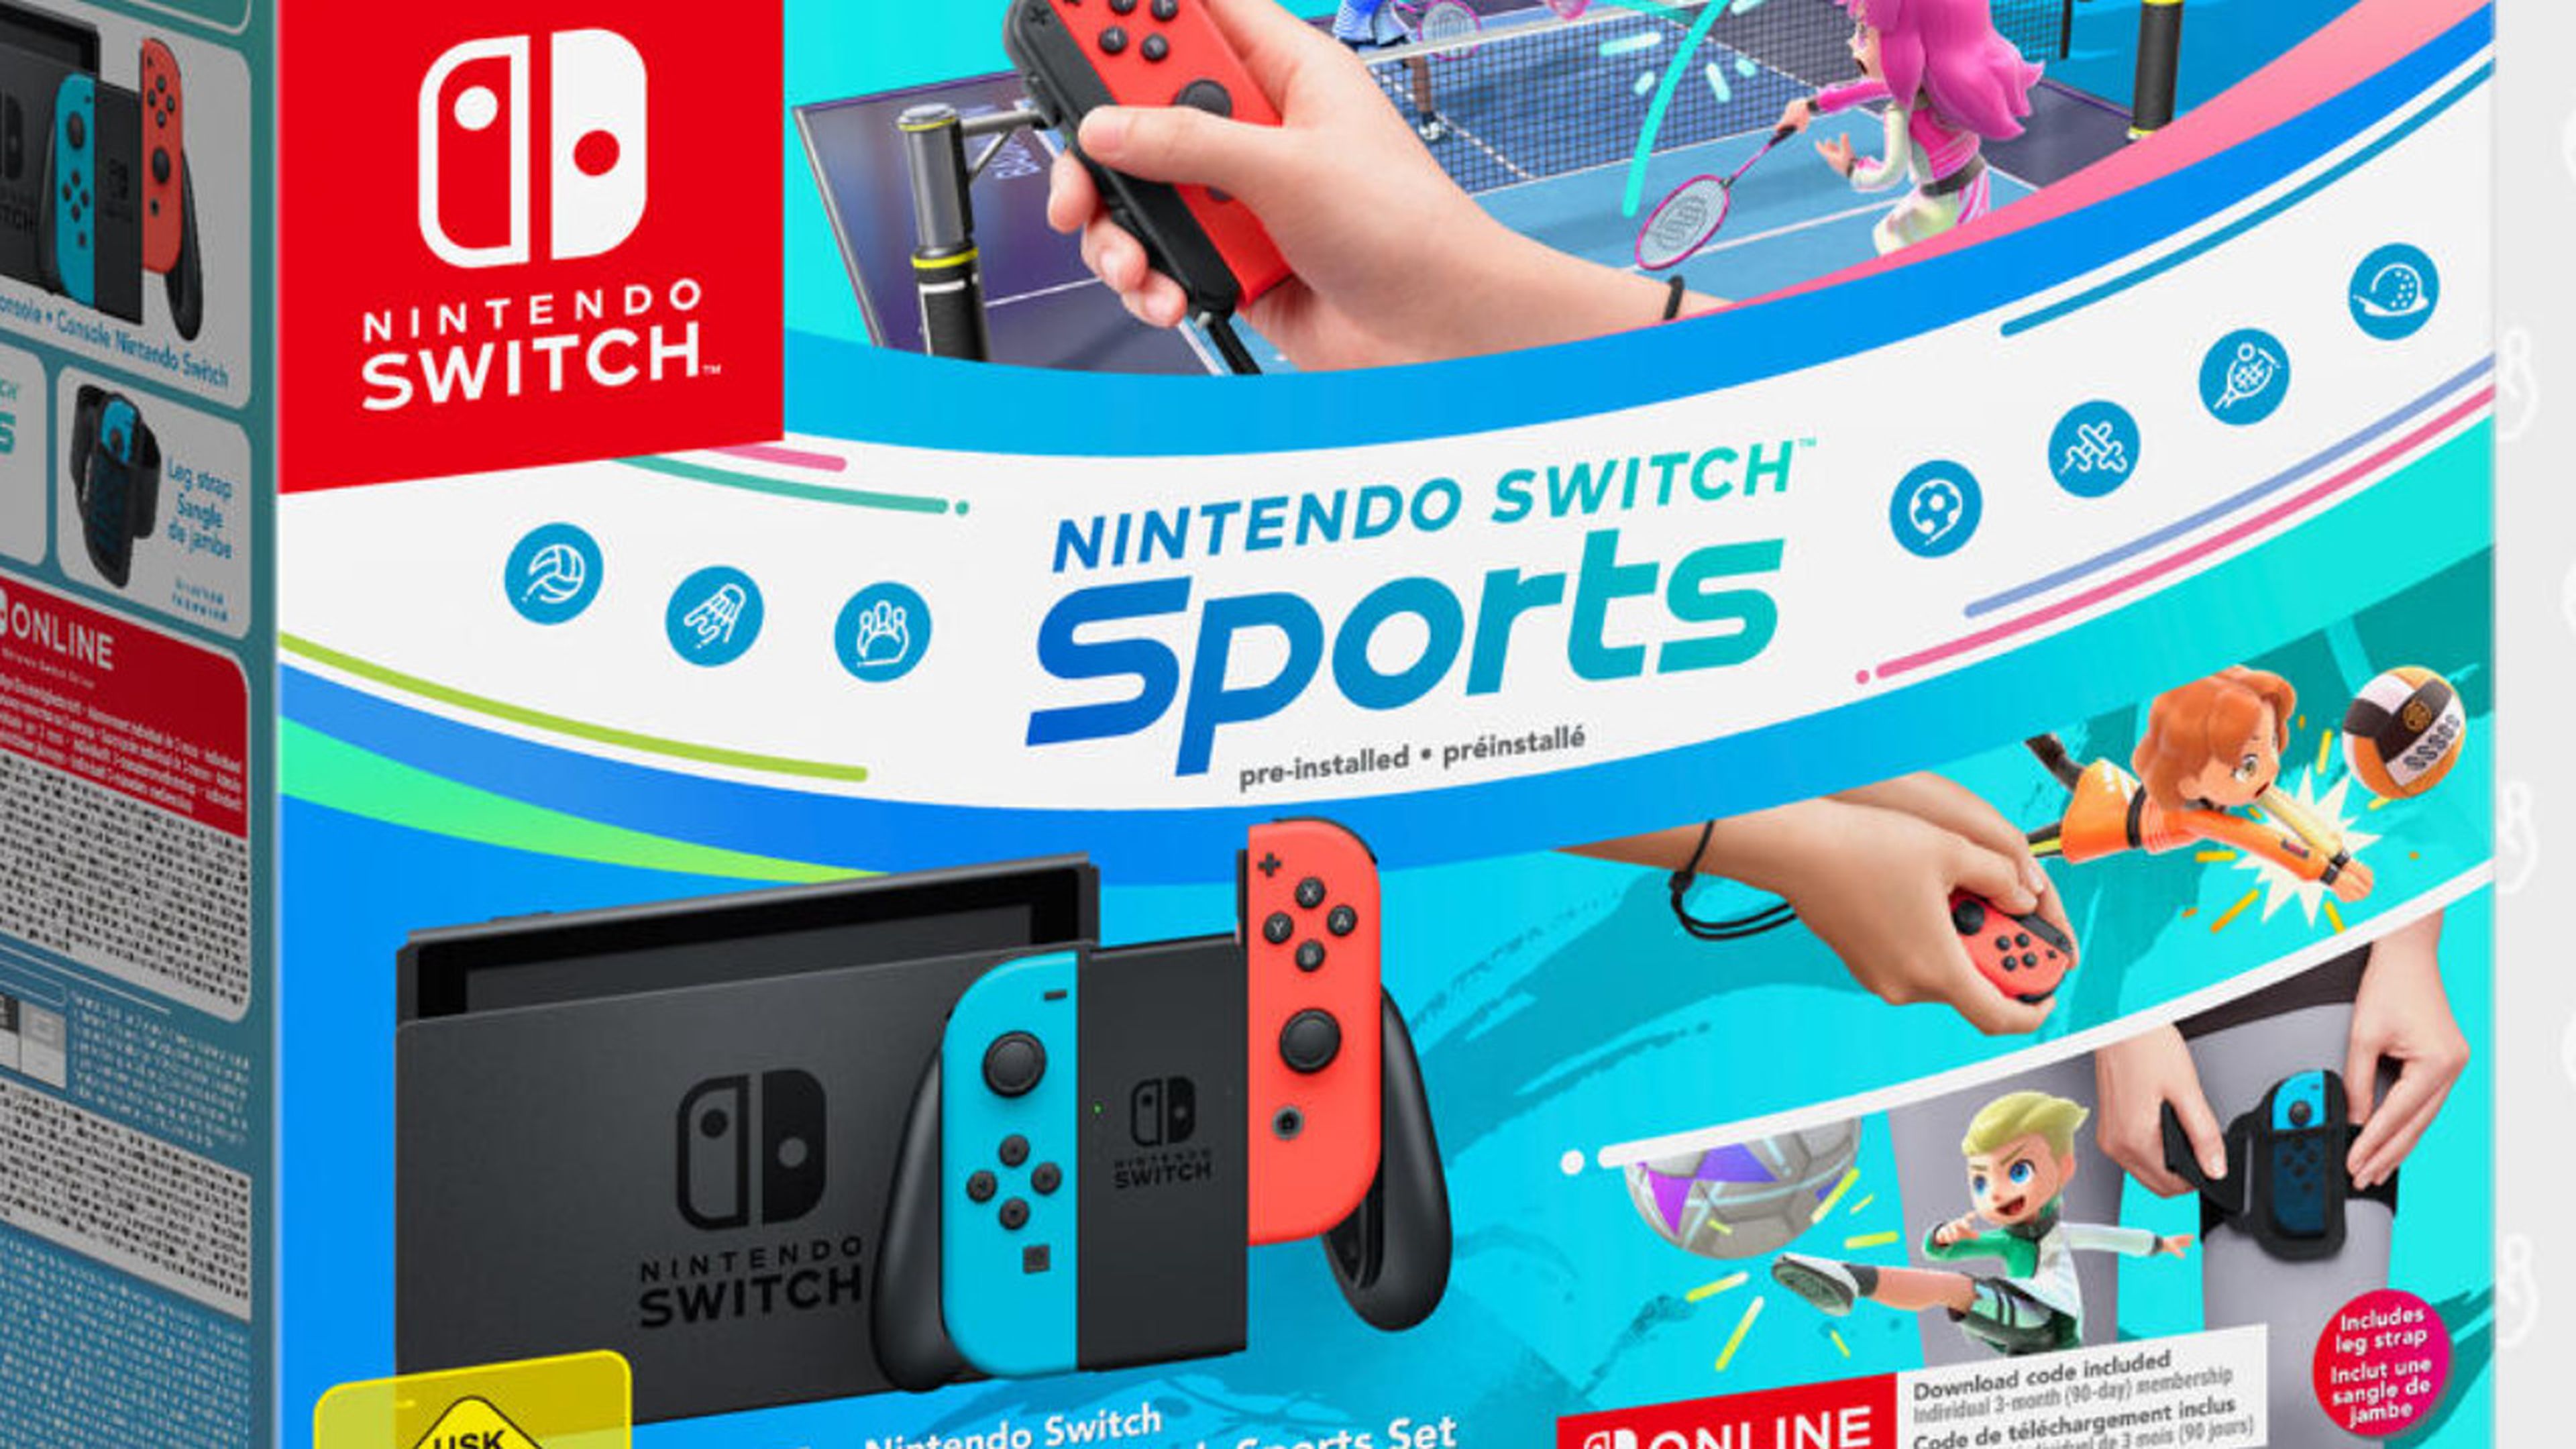 Nintendo Switch - Pack Console Switch Sports